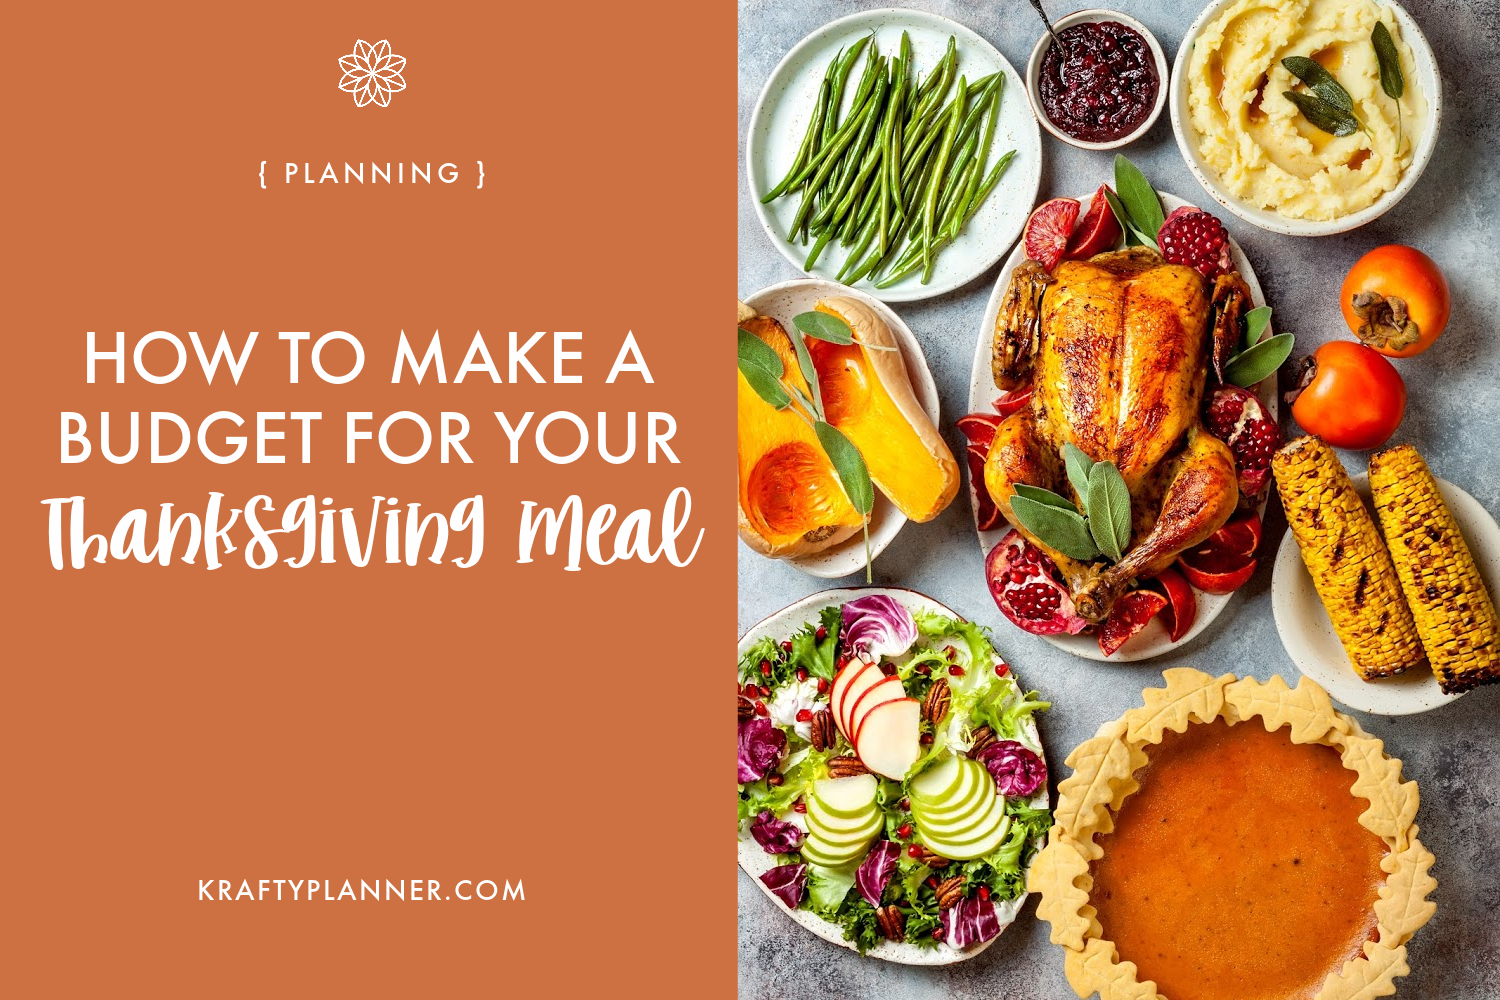 How to Make a Budget for Your Thanksgiving Meal